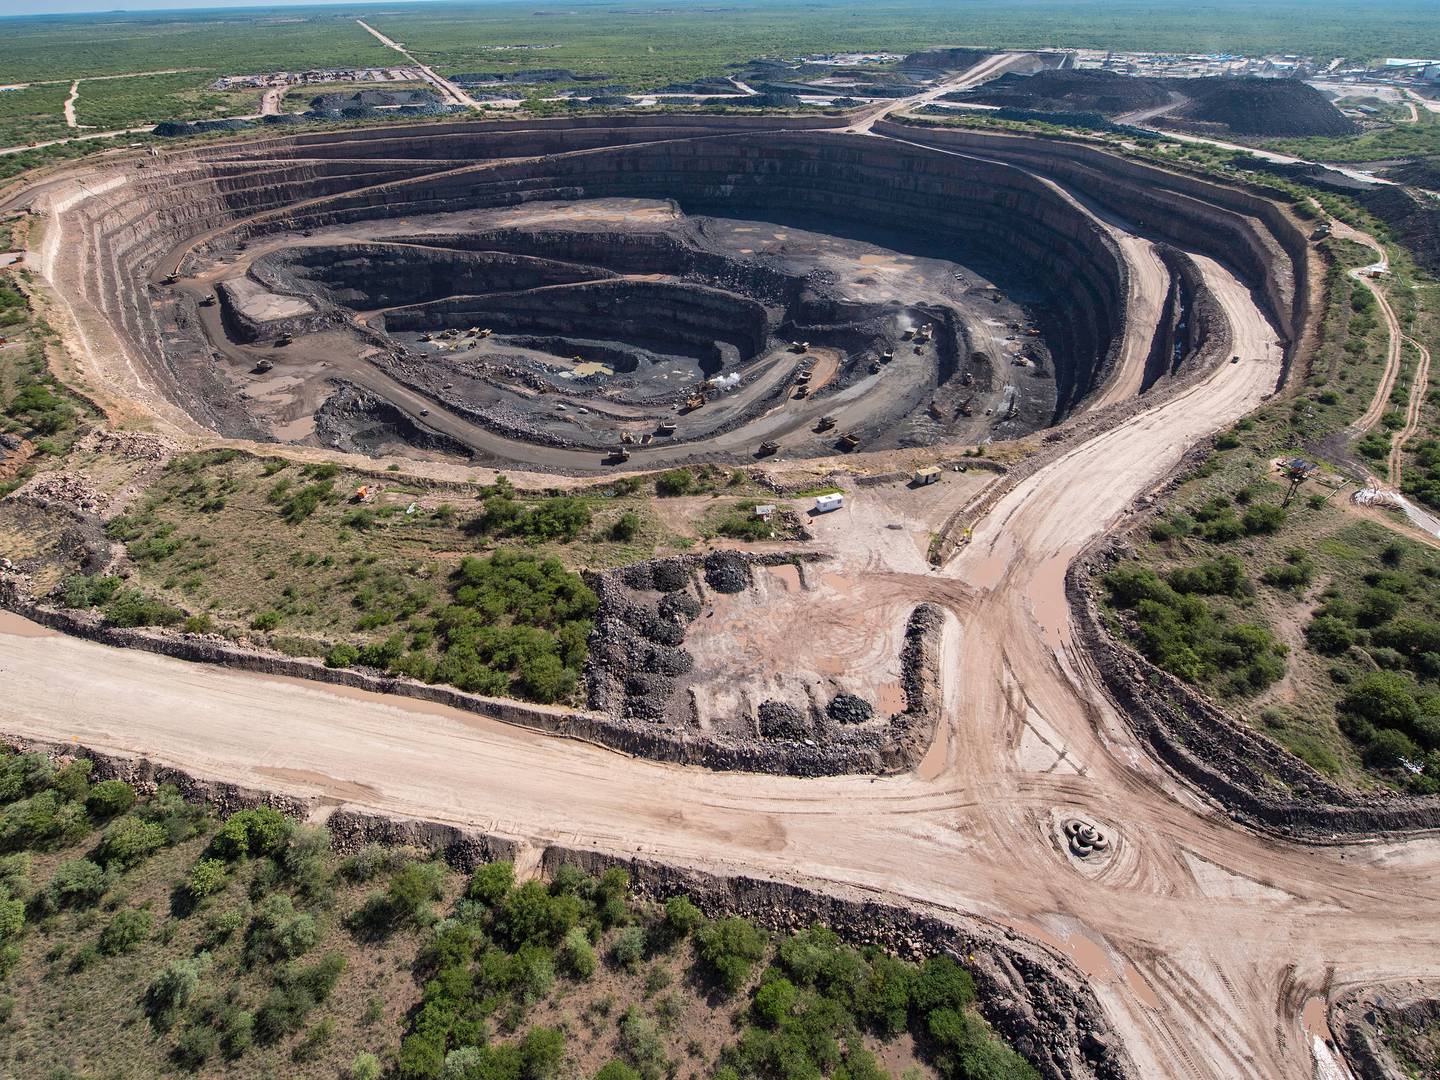 The Lucara-run Karowe diamond mine in Botswana, a country which relies on mined diamonds for 80 per cent of its export earnings